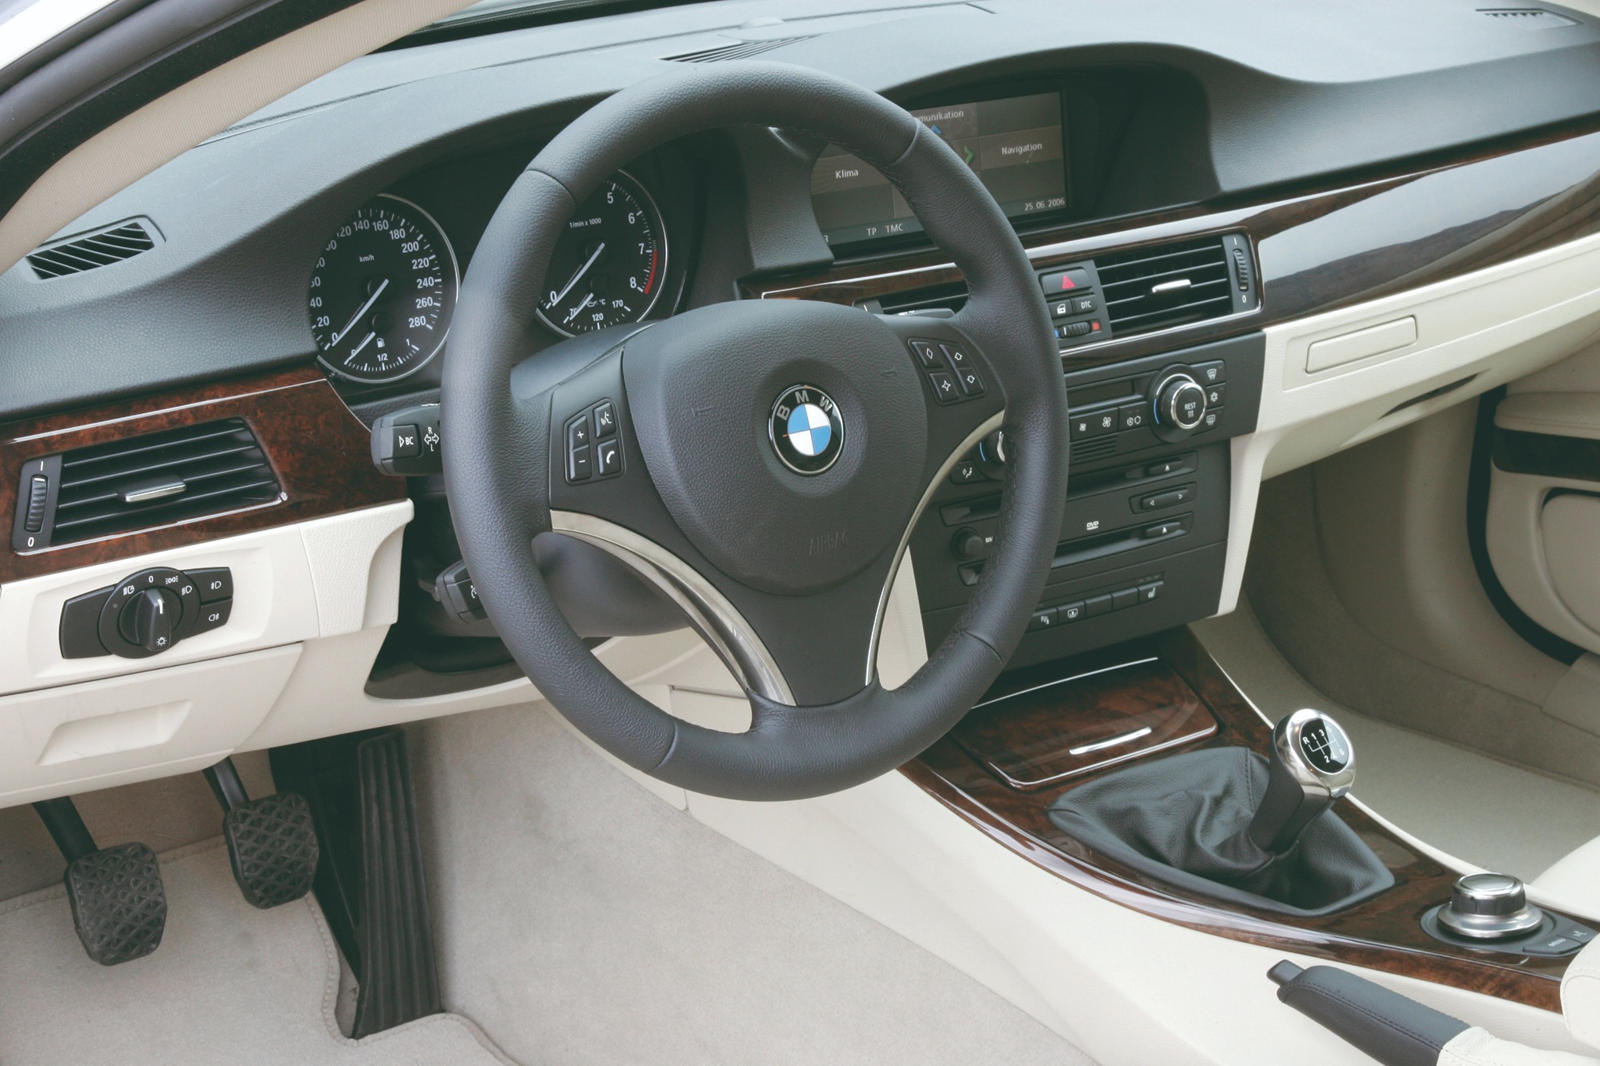 Give rights ferry dedication 2008 BMW 3 Series Coupe Interior Photos | CarBuzz